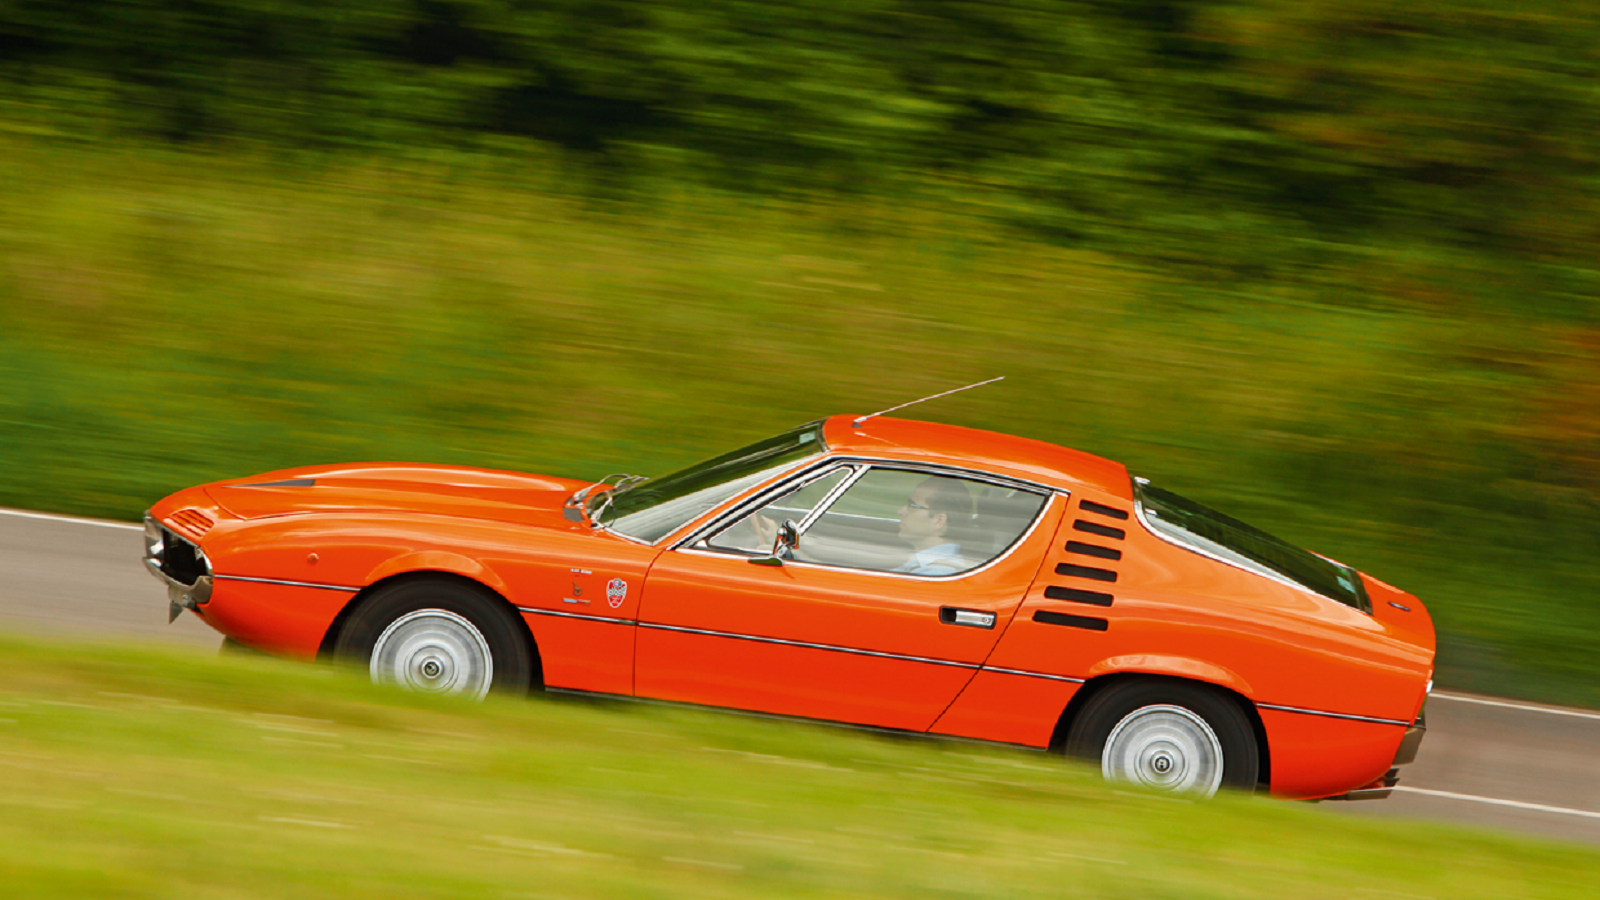 25 of the most significant Alfa Romeo coupés